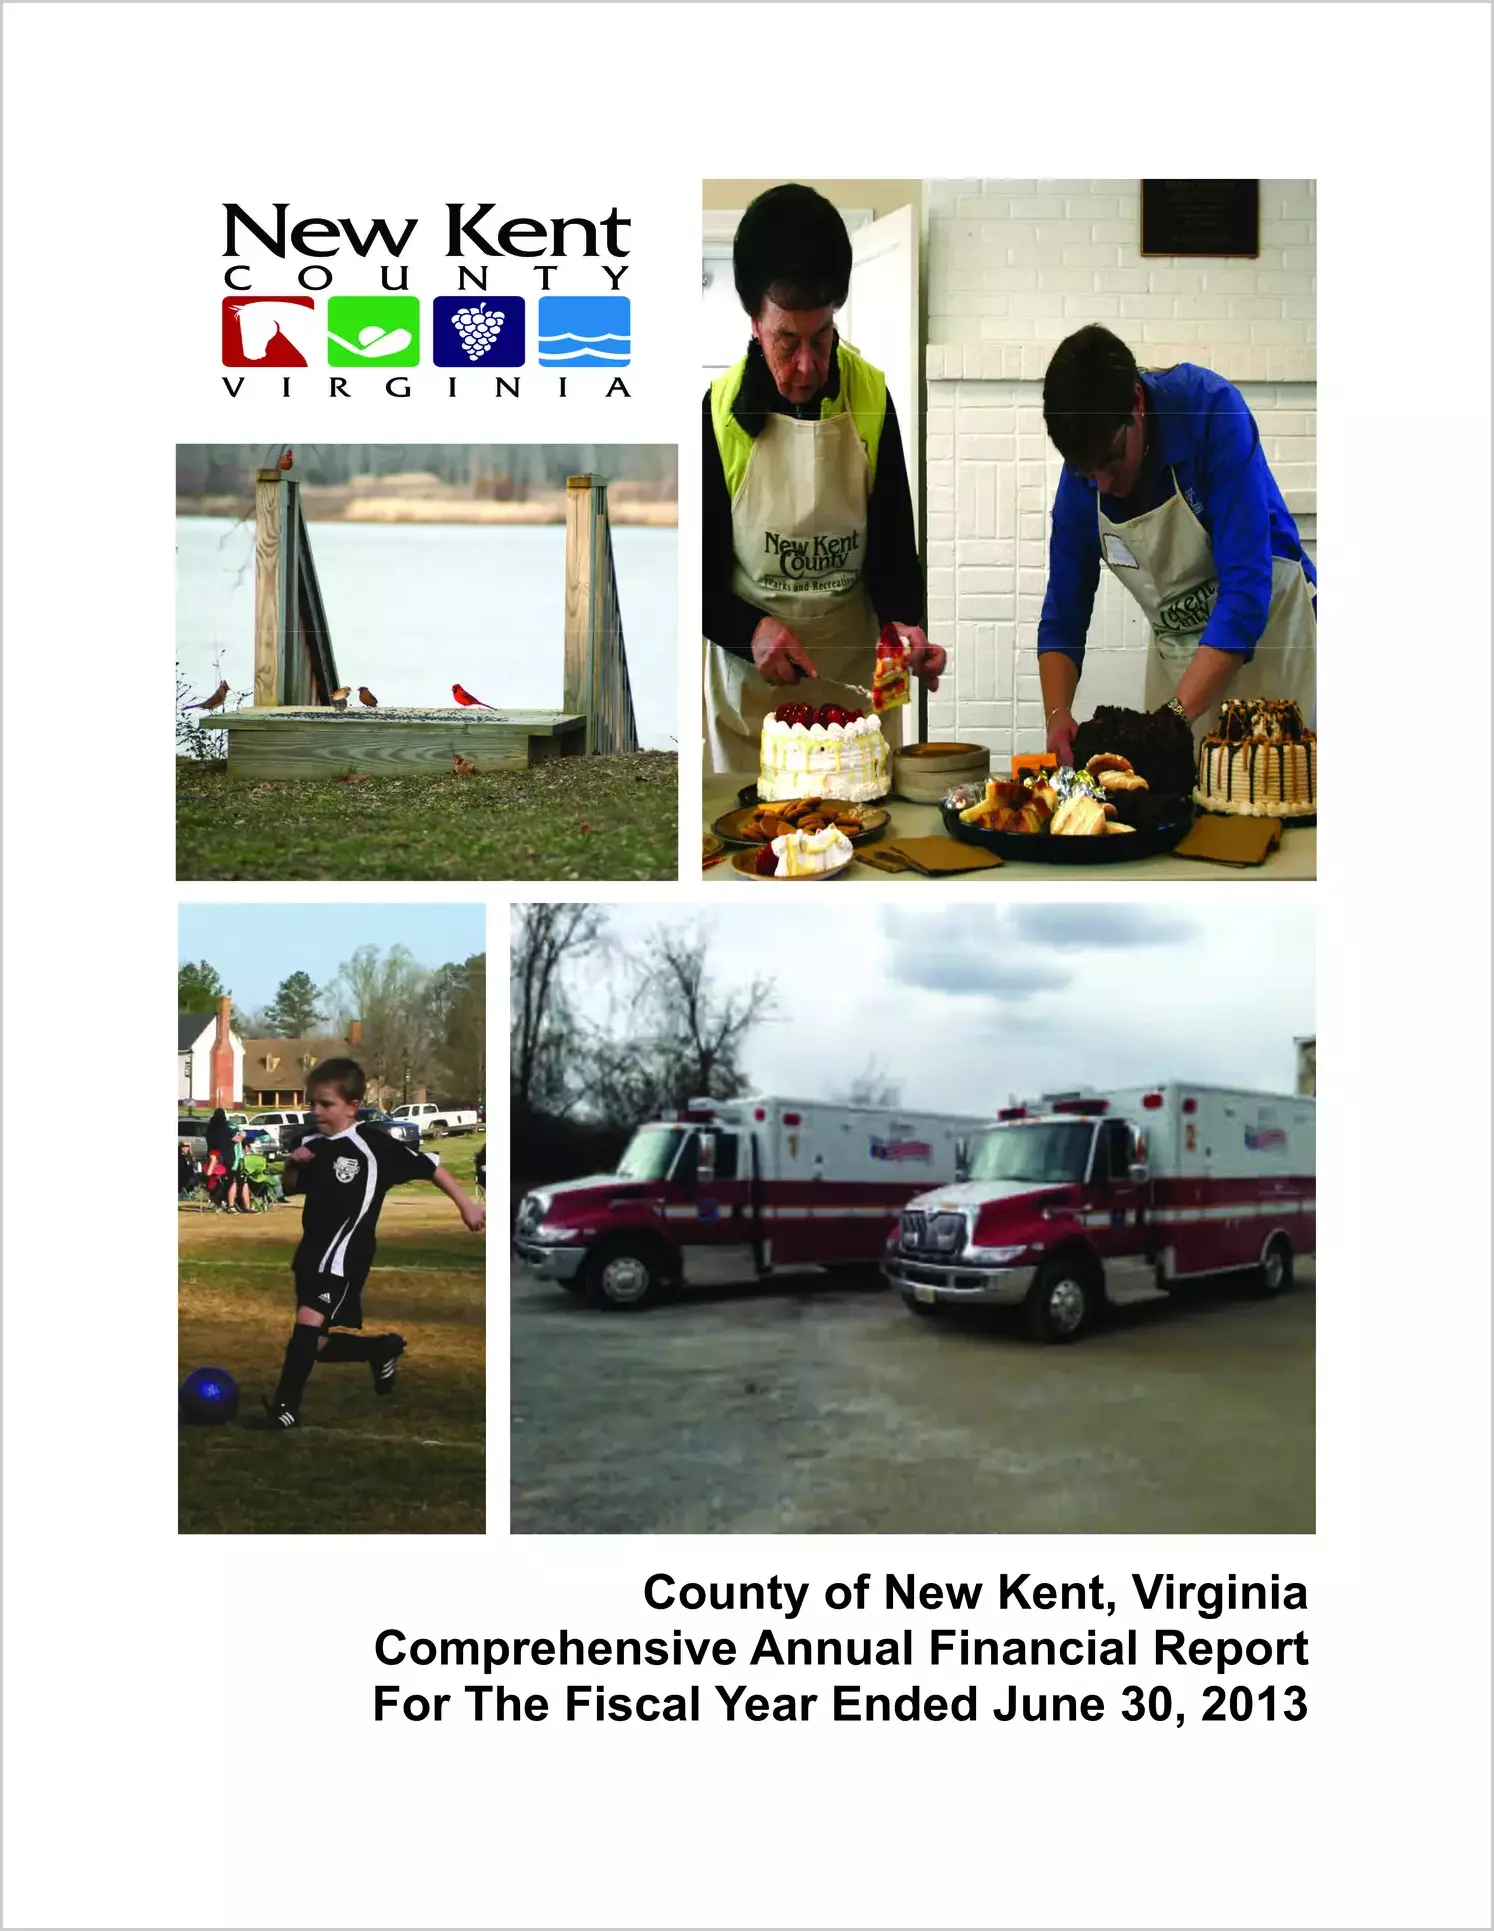 2013 Annual Financial Report for County of New Kent